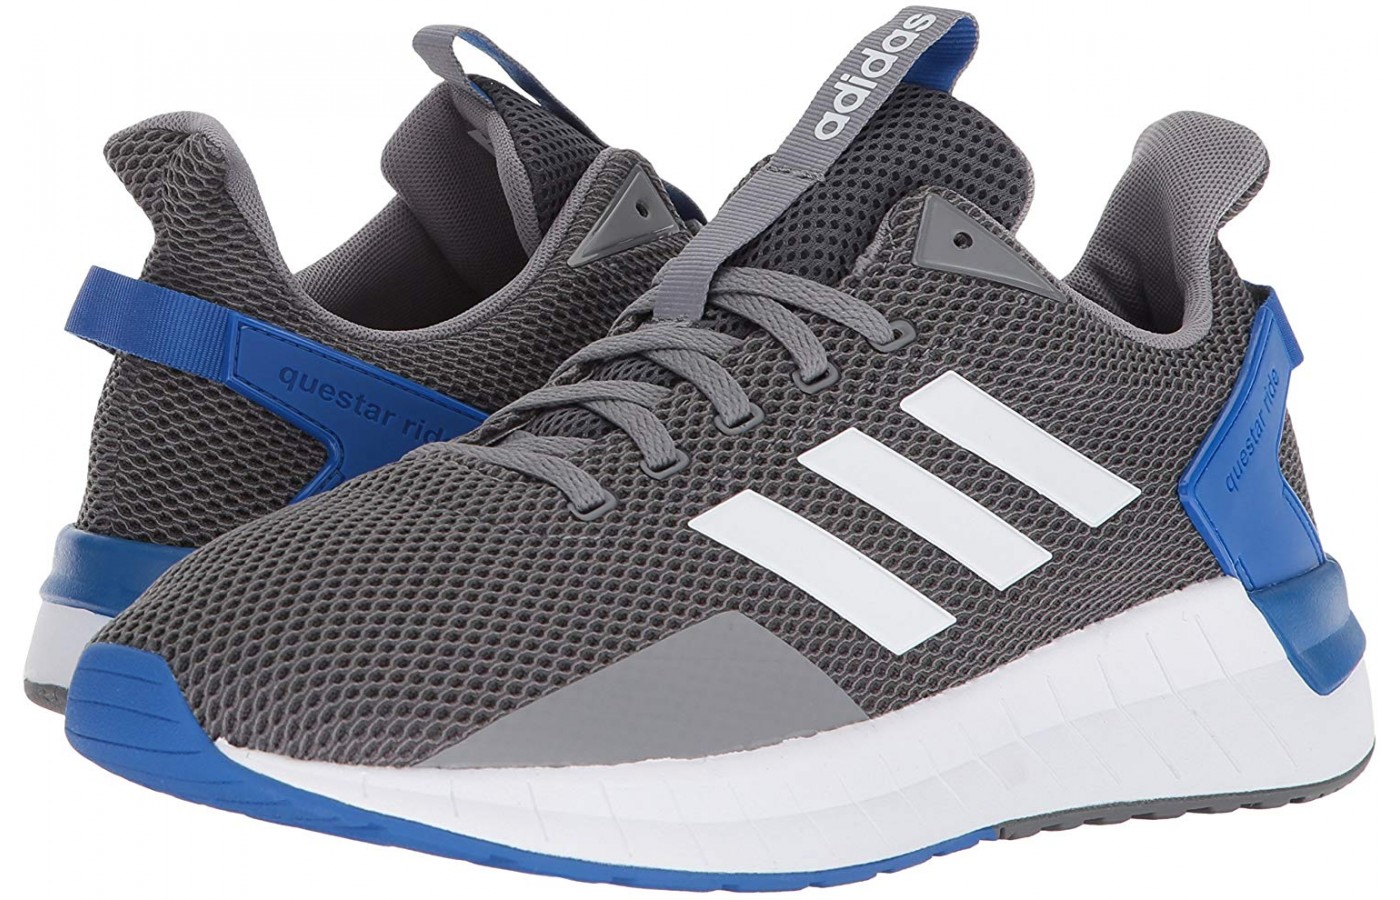 Adidas Questar Ride Reviewed \u0026 Rated in 